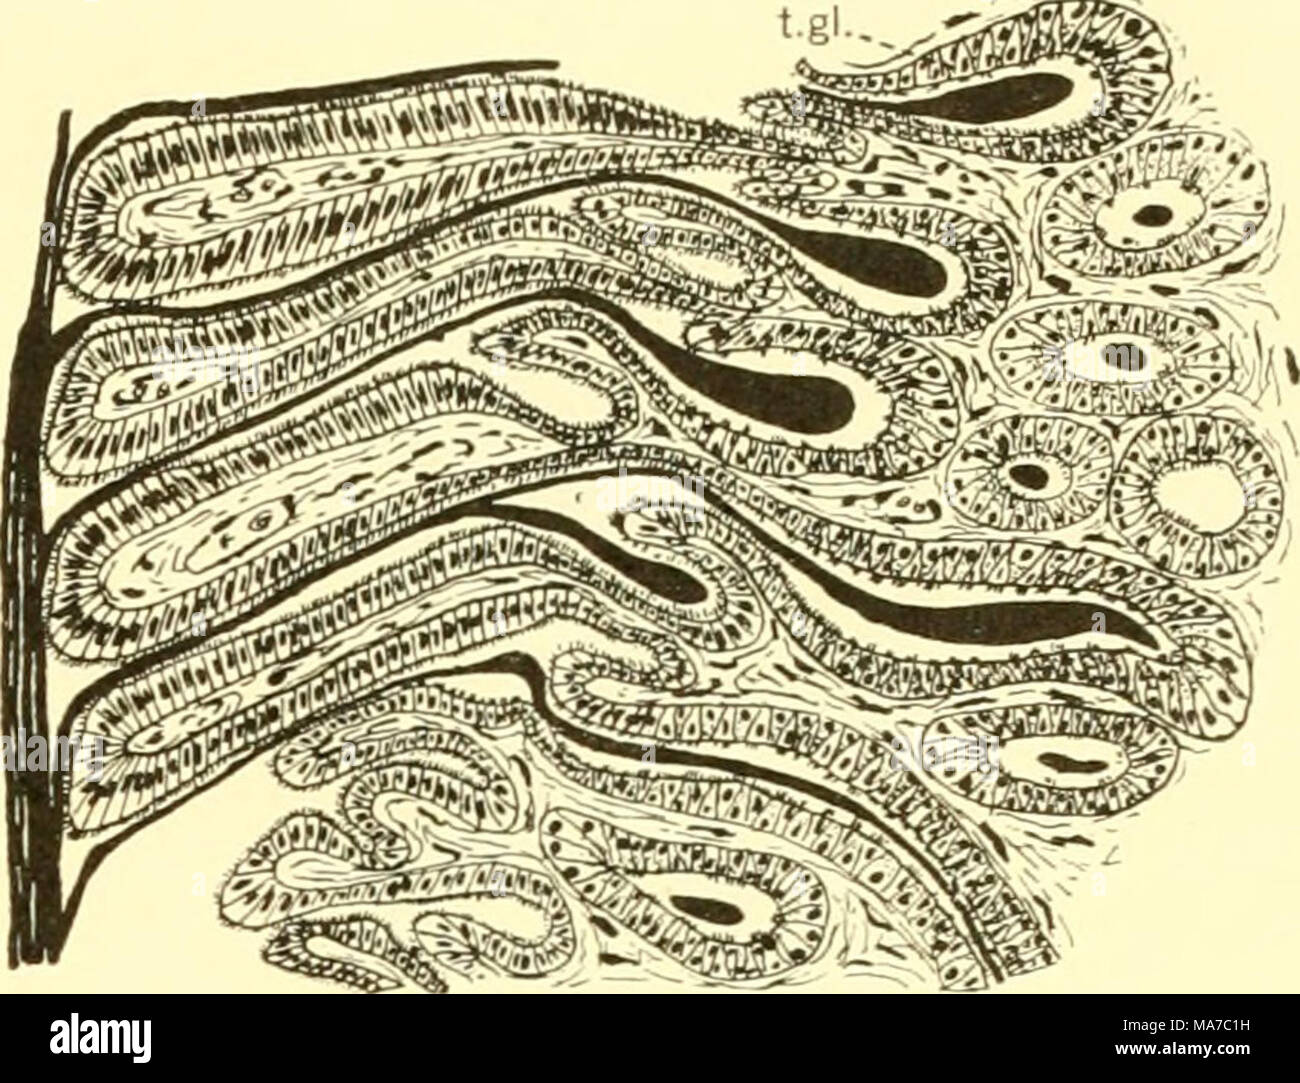 . The elasmobranch fishes . Fig. 262. Section through shell gland, Scyl- Hum. (From Borcea.) t.gh, secretory cells. The ovaries of the adult female usu- ally arise as paired structures, and are bound to the anterodorsal wall of the body cavity by a mesentery, the mesovarium (Squalus, fig. 253a). Not infrequently, however, the left ovary atrophies in the adult (Scyllium, Prisfiophorus, Carcharias, Galeus, Mustelus, and Zygaena). They occupy the anterior part of a mass of tissue which, as the epigonal organ, may extend along the dorsal wall of the body cavity pos- teriorly where it joins the rec Stock Photo